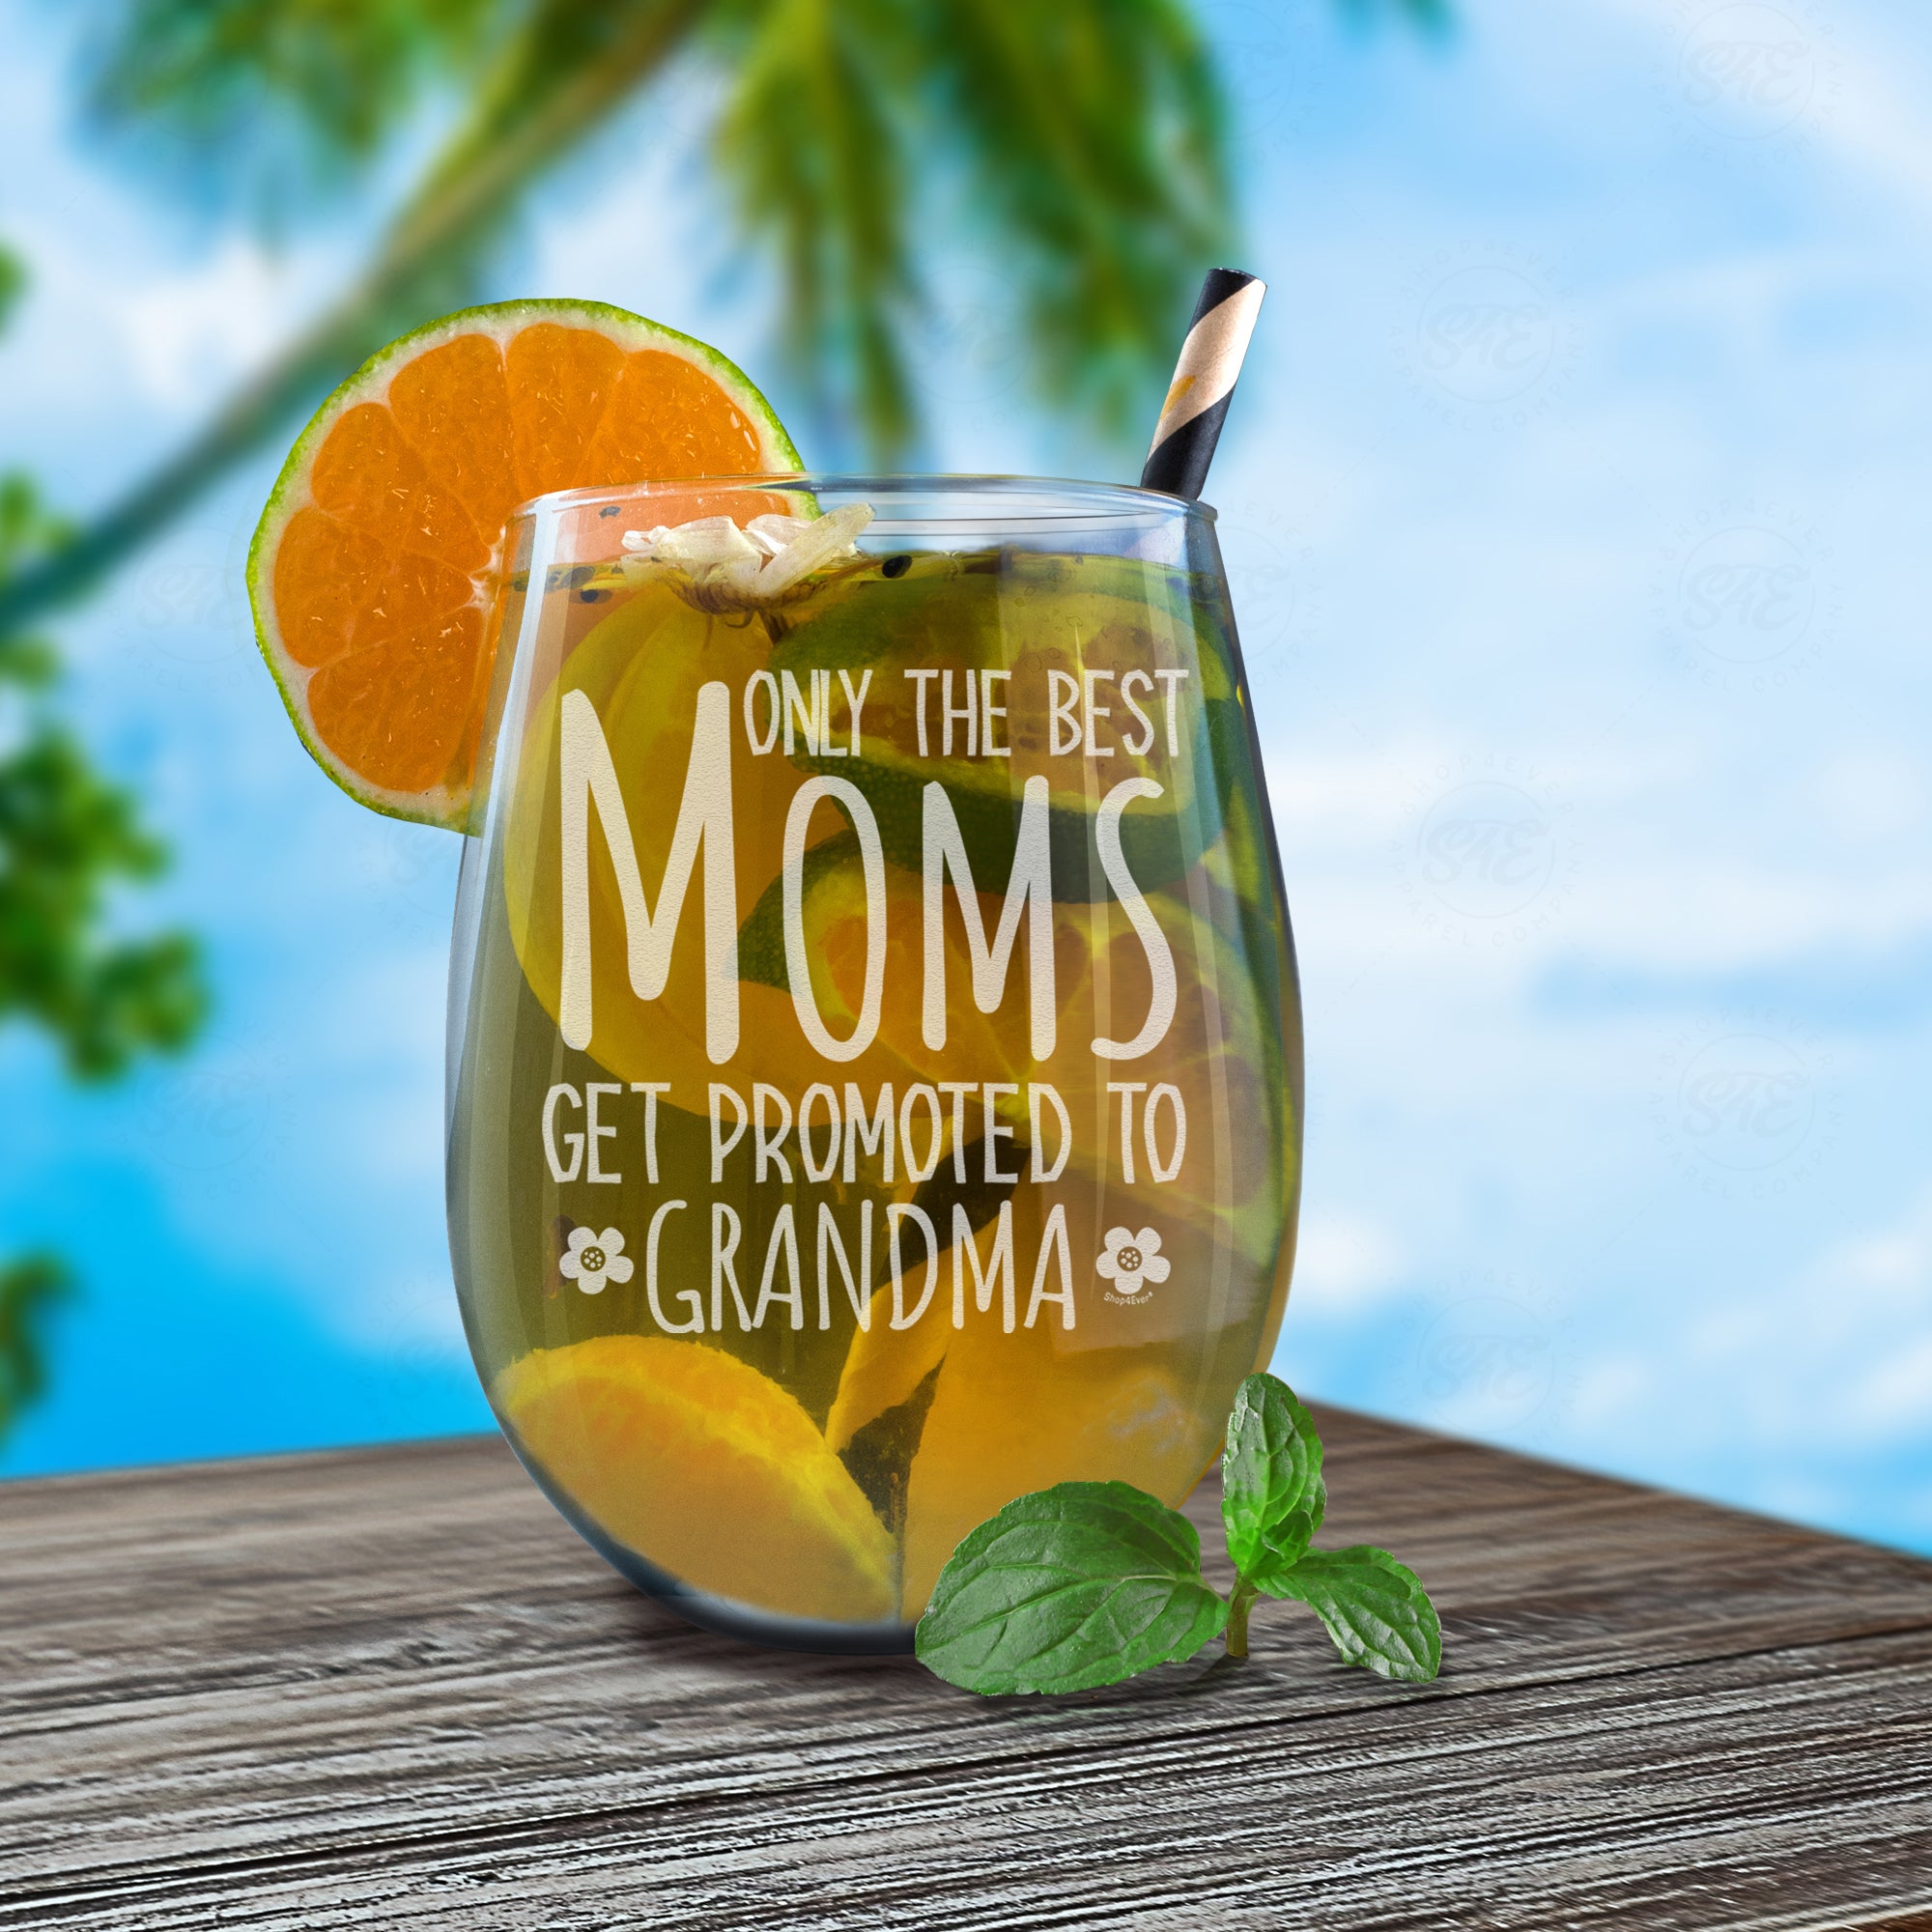 Only The Best Moms Get Promoted To Grandma Engraved Stemless Wine Glass Pregnancy Announcement New Grandma To Be